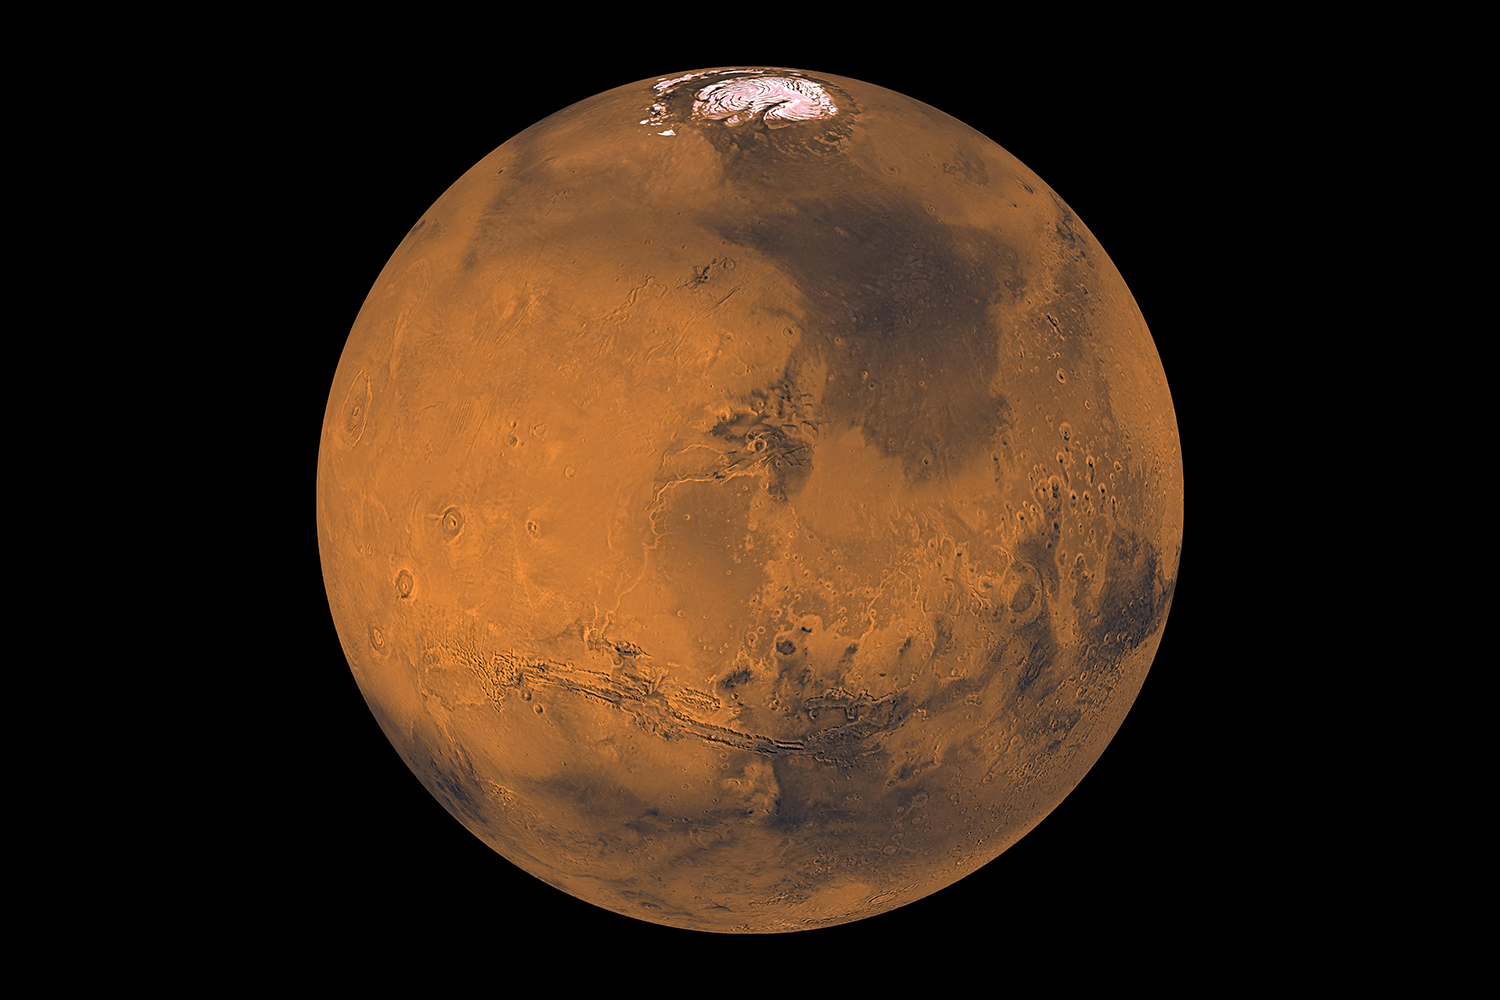 Mars with an orange color with the north pole a pink white color